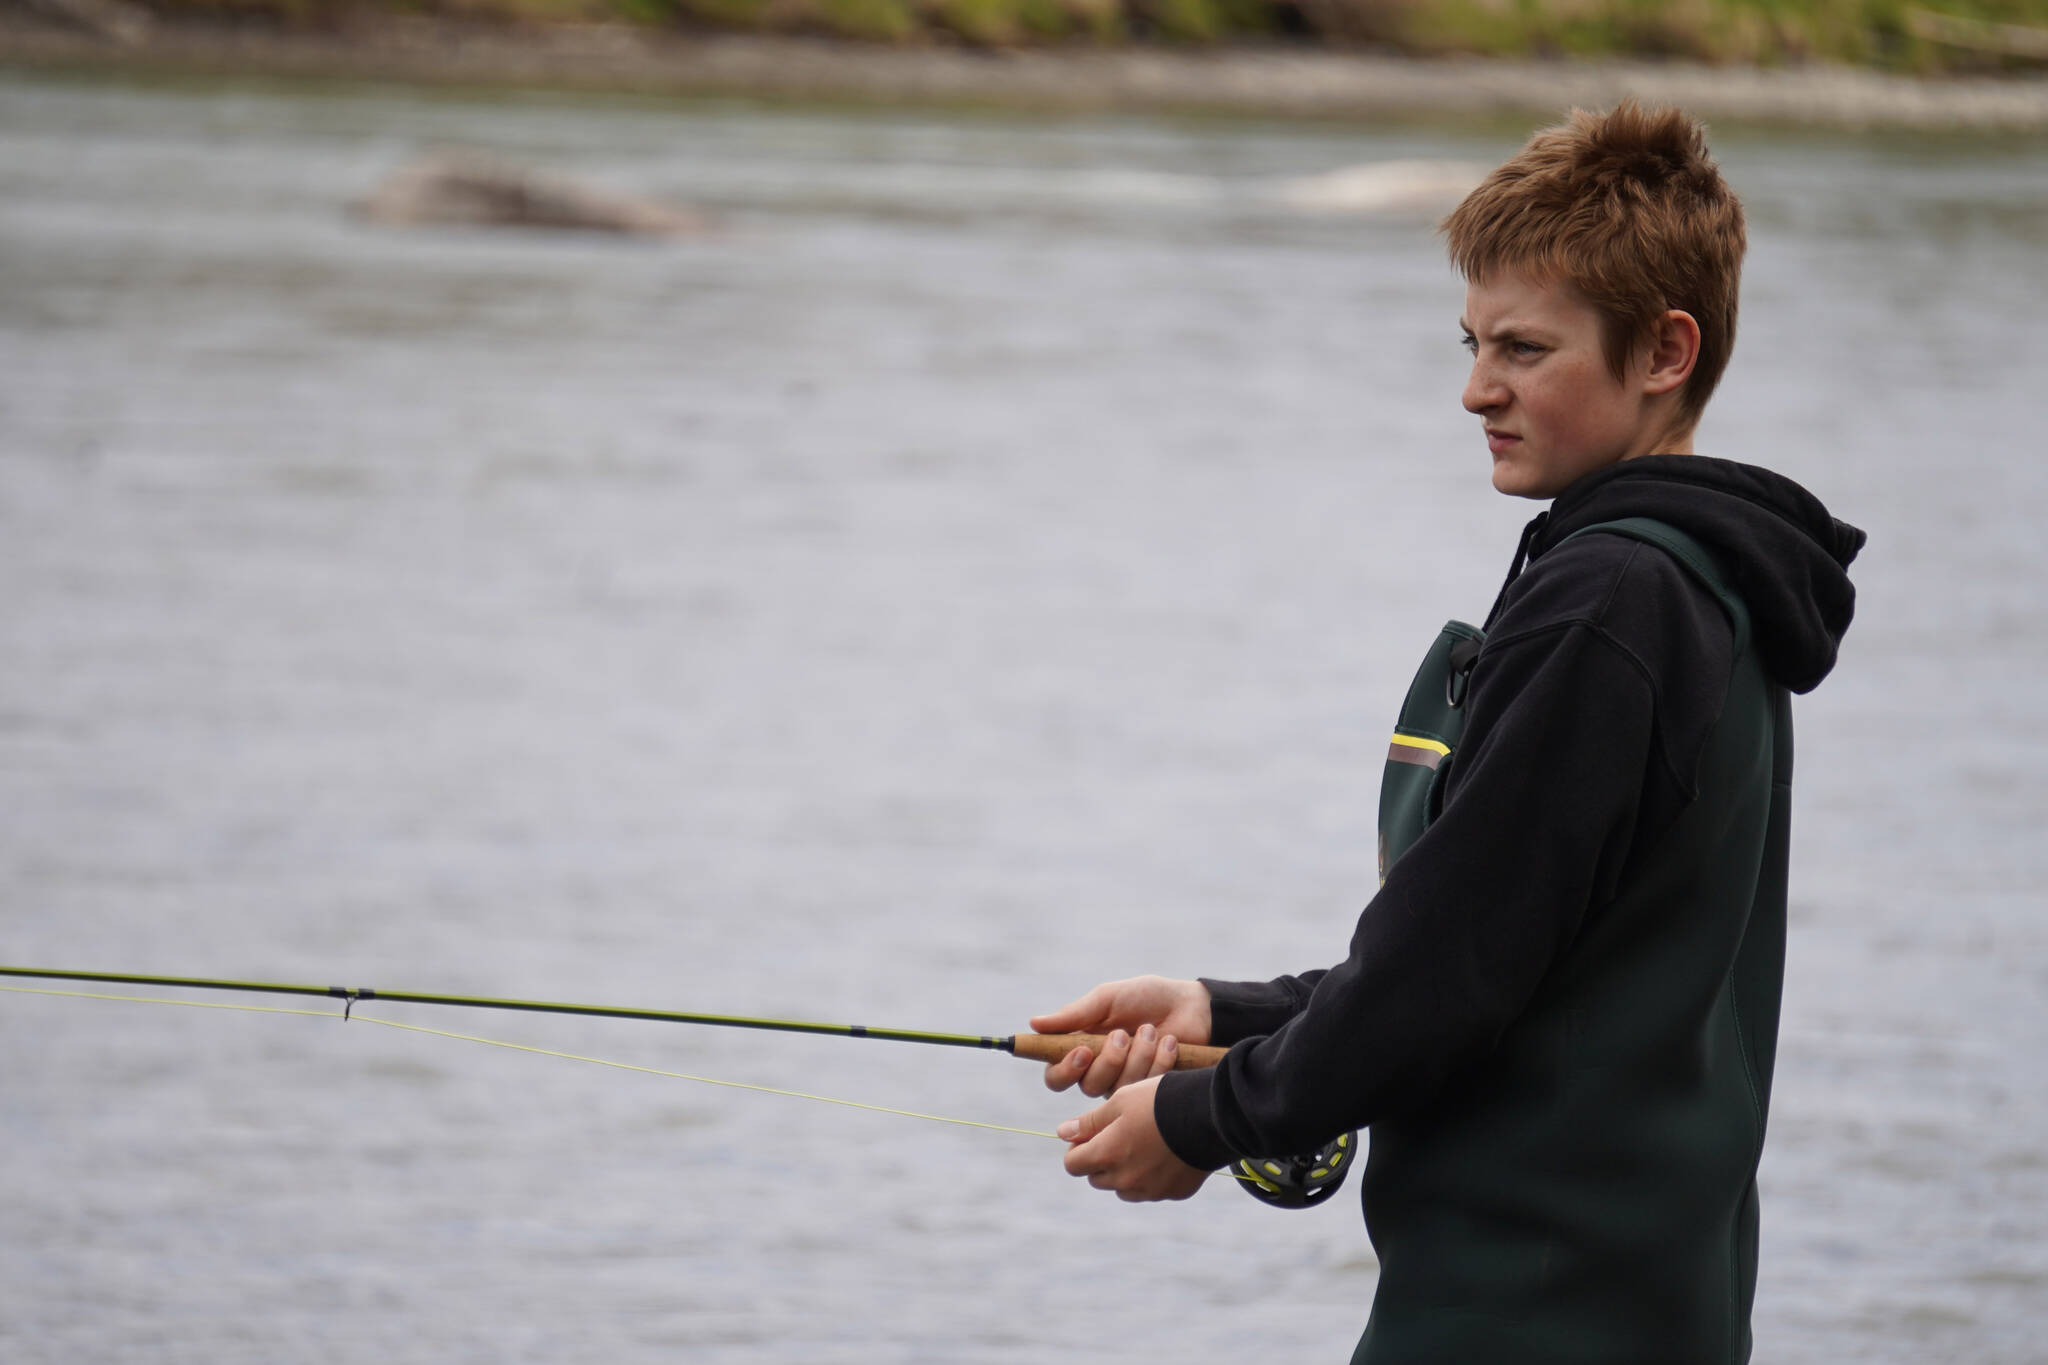 Middle schoolers practice fly casting into the Kenai River during a kids camp put on by Trout Unlimited on Wednesday, May 24, 2023, at the Donald E. Gilman Kenai River Center in Soldotna, Alaska. (Jake Dye/Peninsula Clarion)